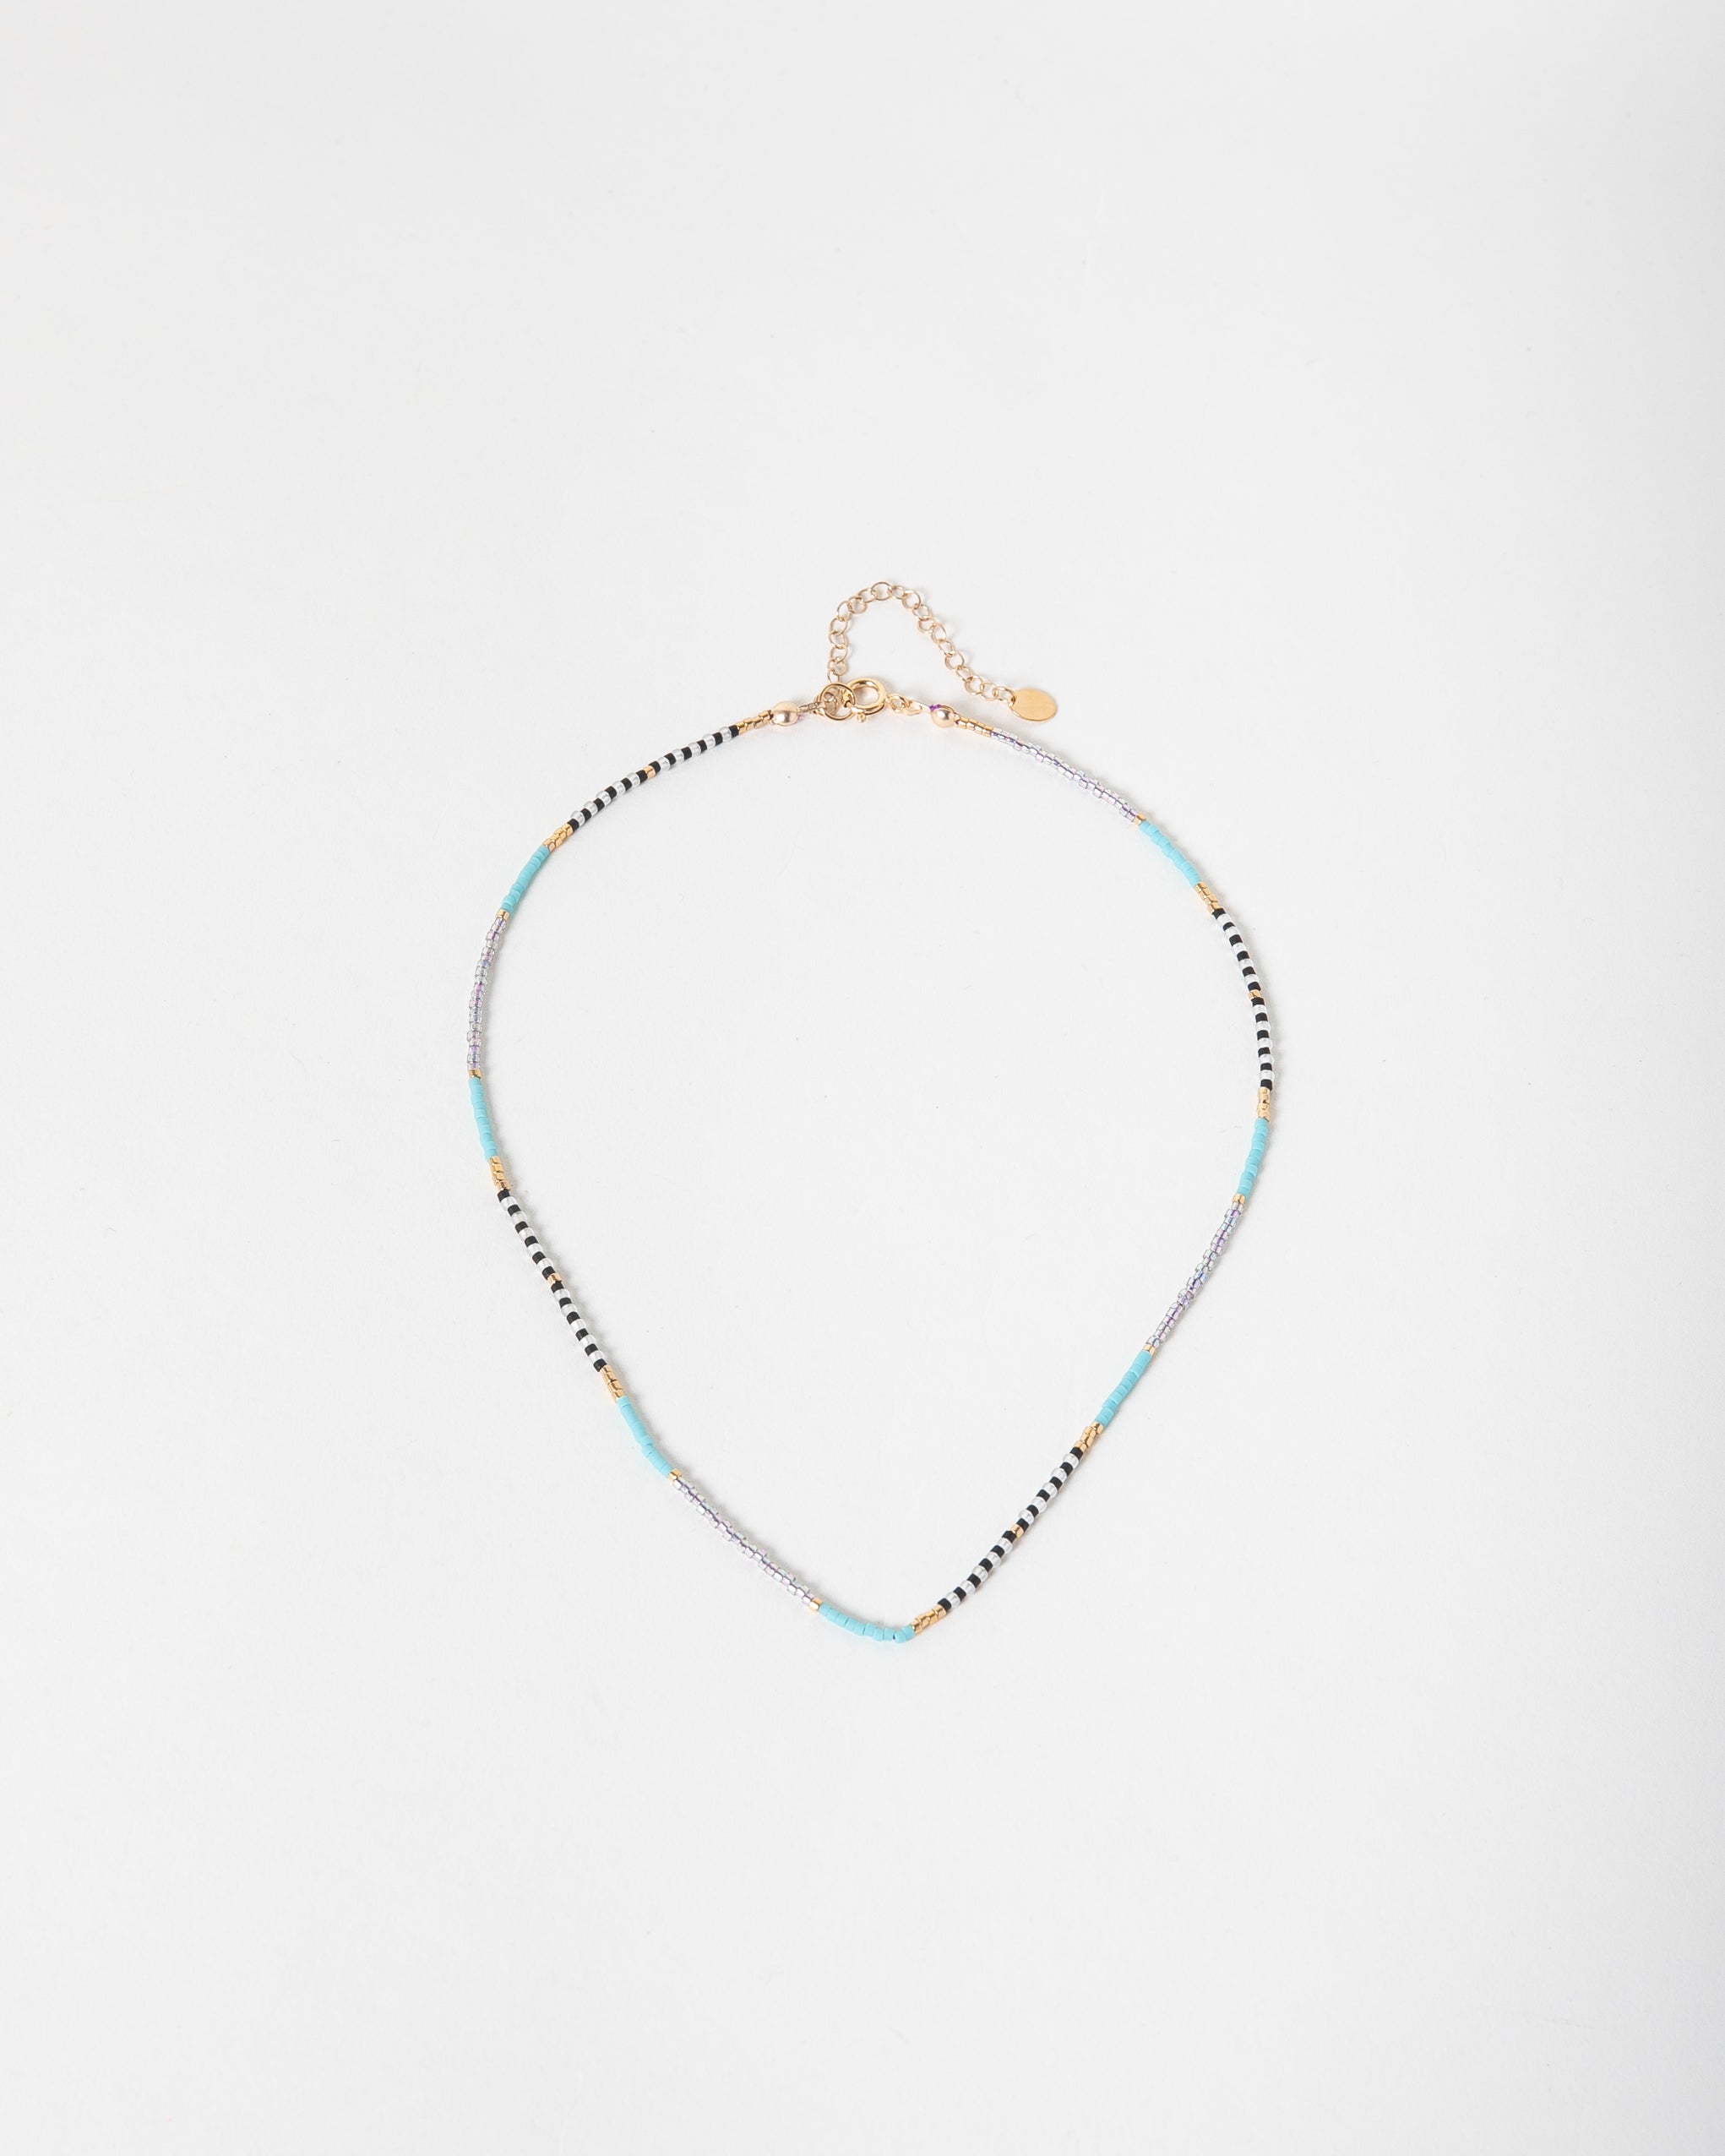 Delicate Miyuki Beaded Necklace in Turquoise and Gold